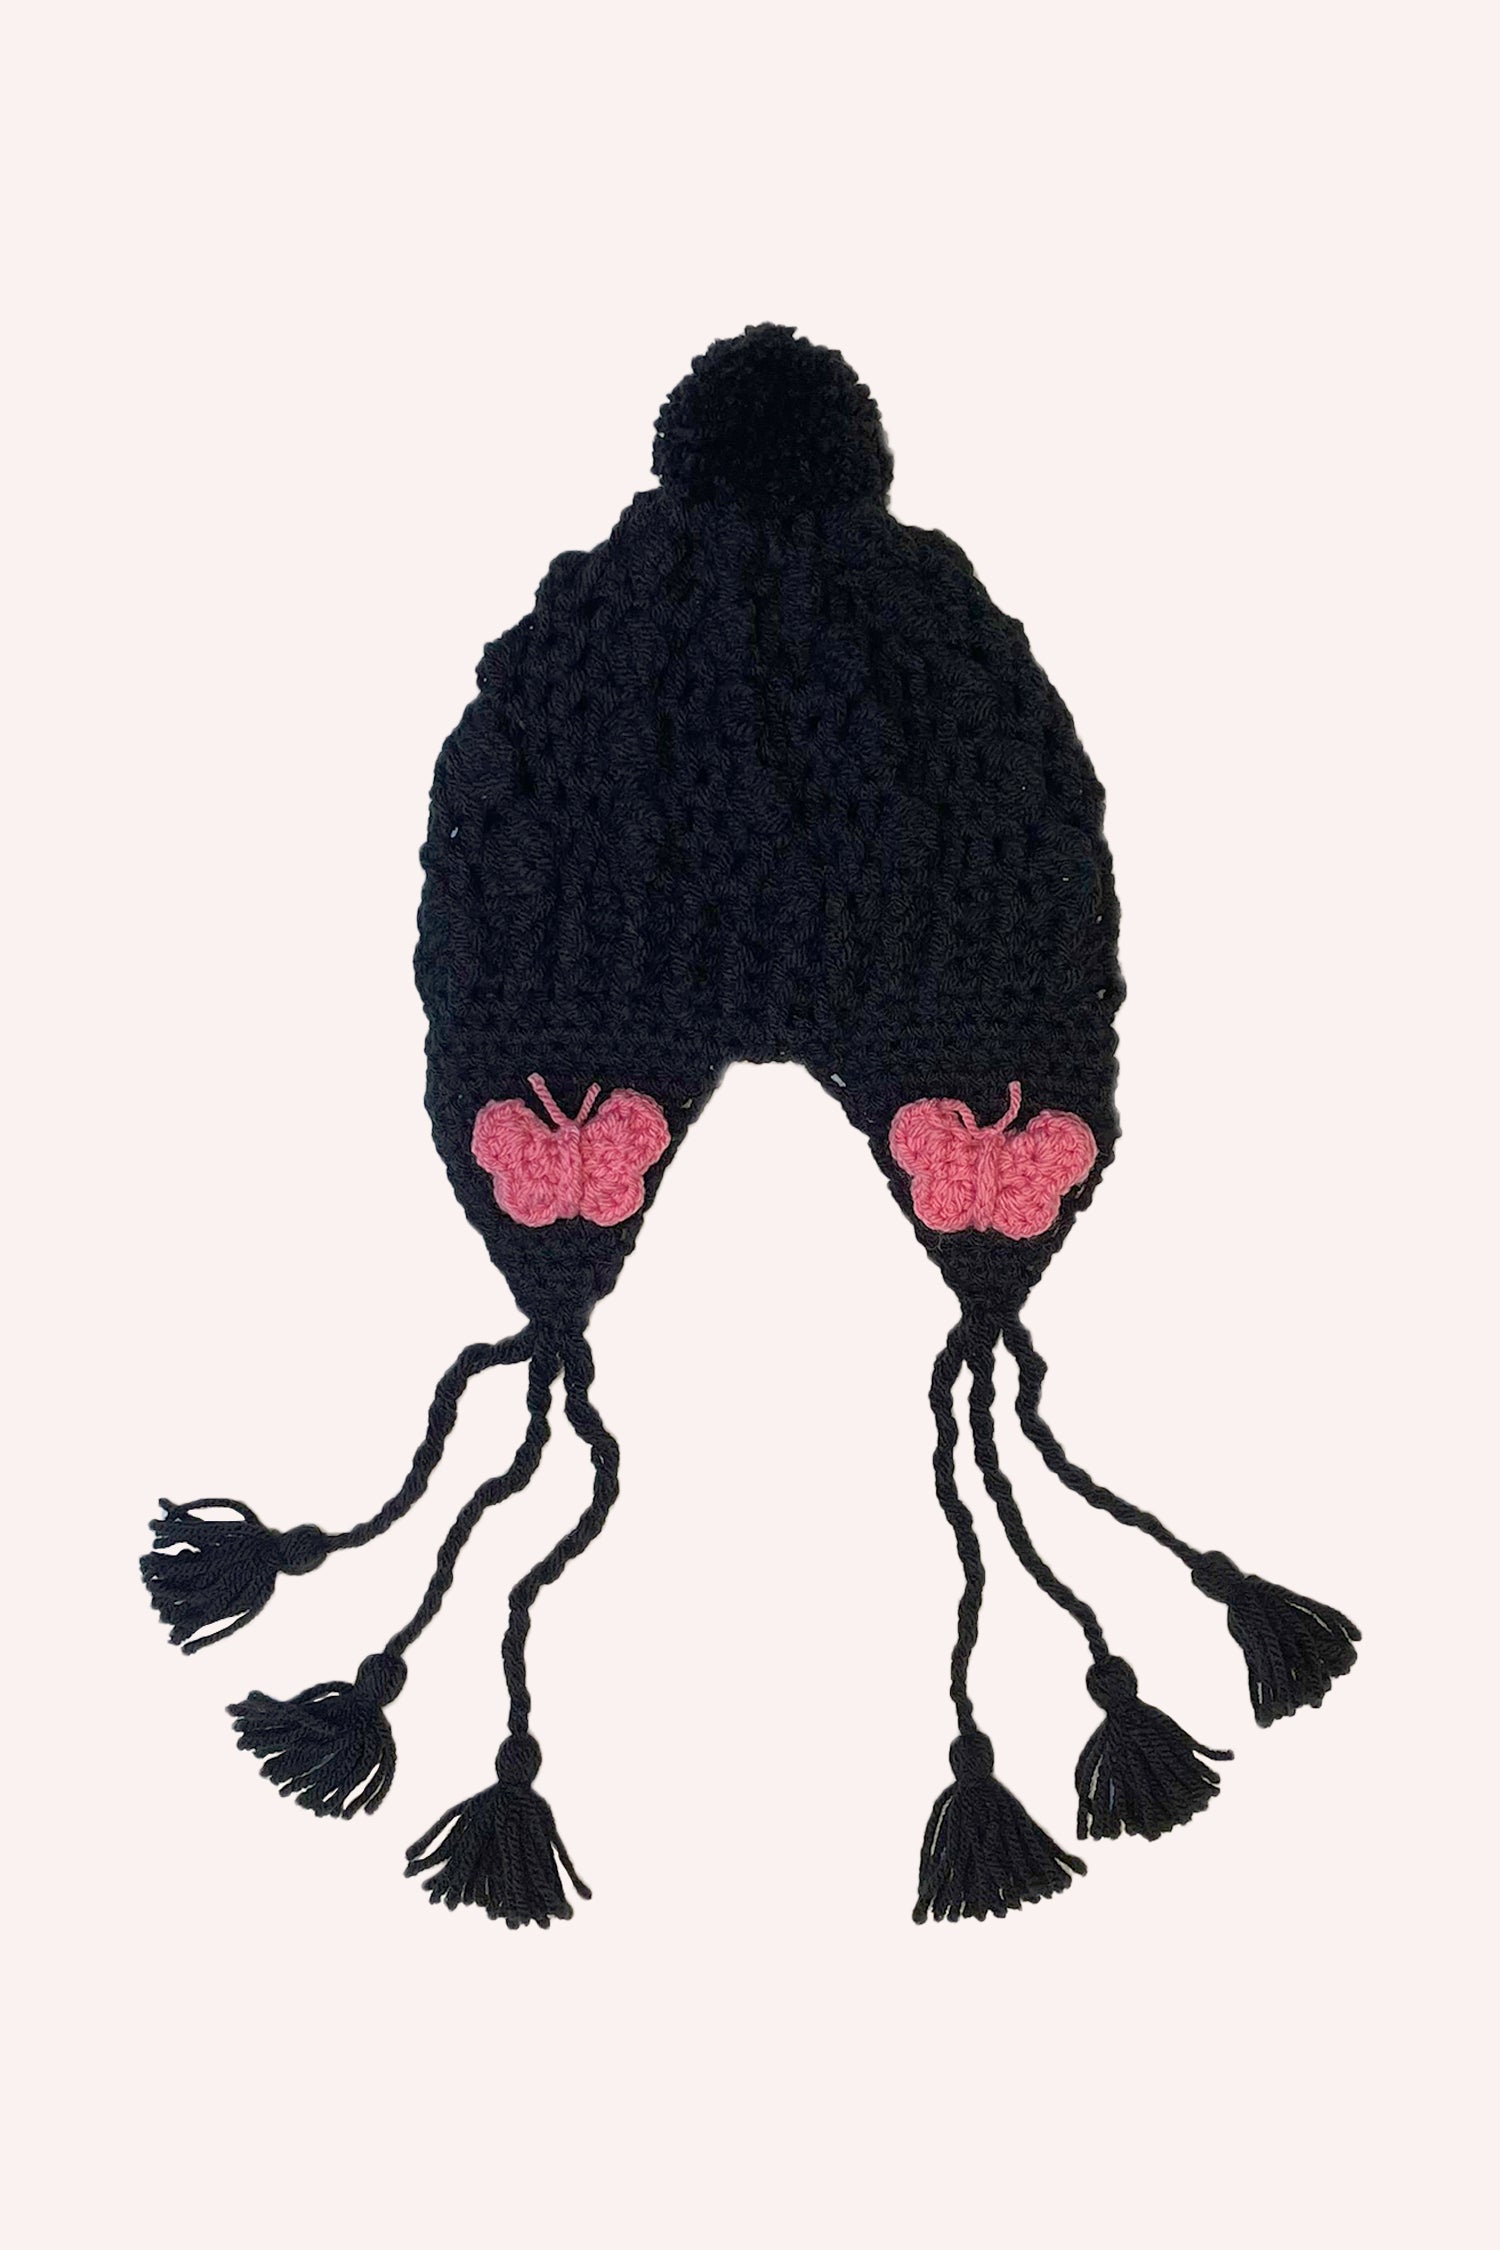 Black crochet hat with pom-pom and heart-shaped rose flaps, 3 strings on each side, and bobbles at the end